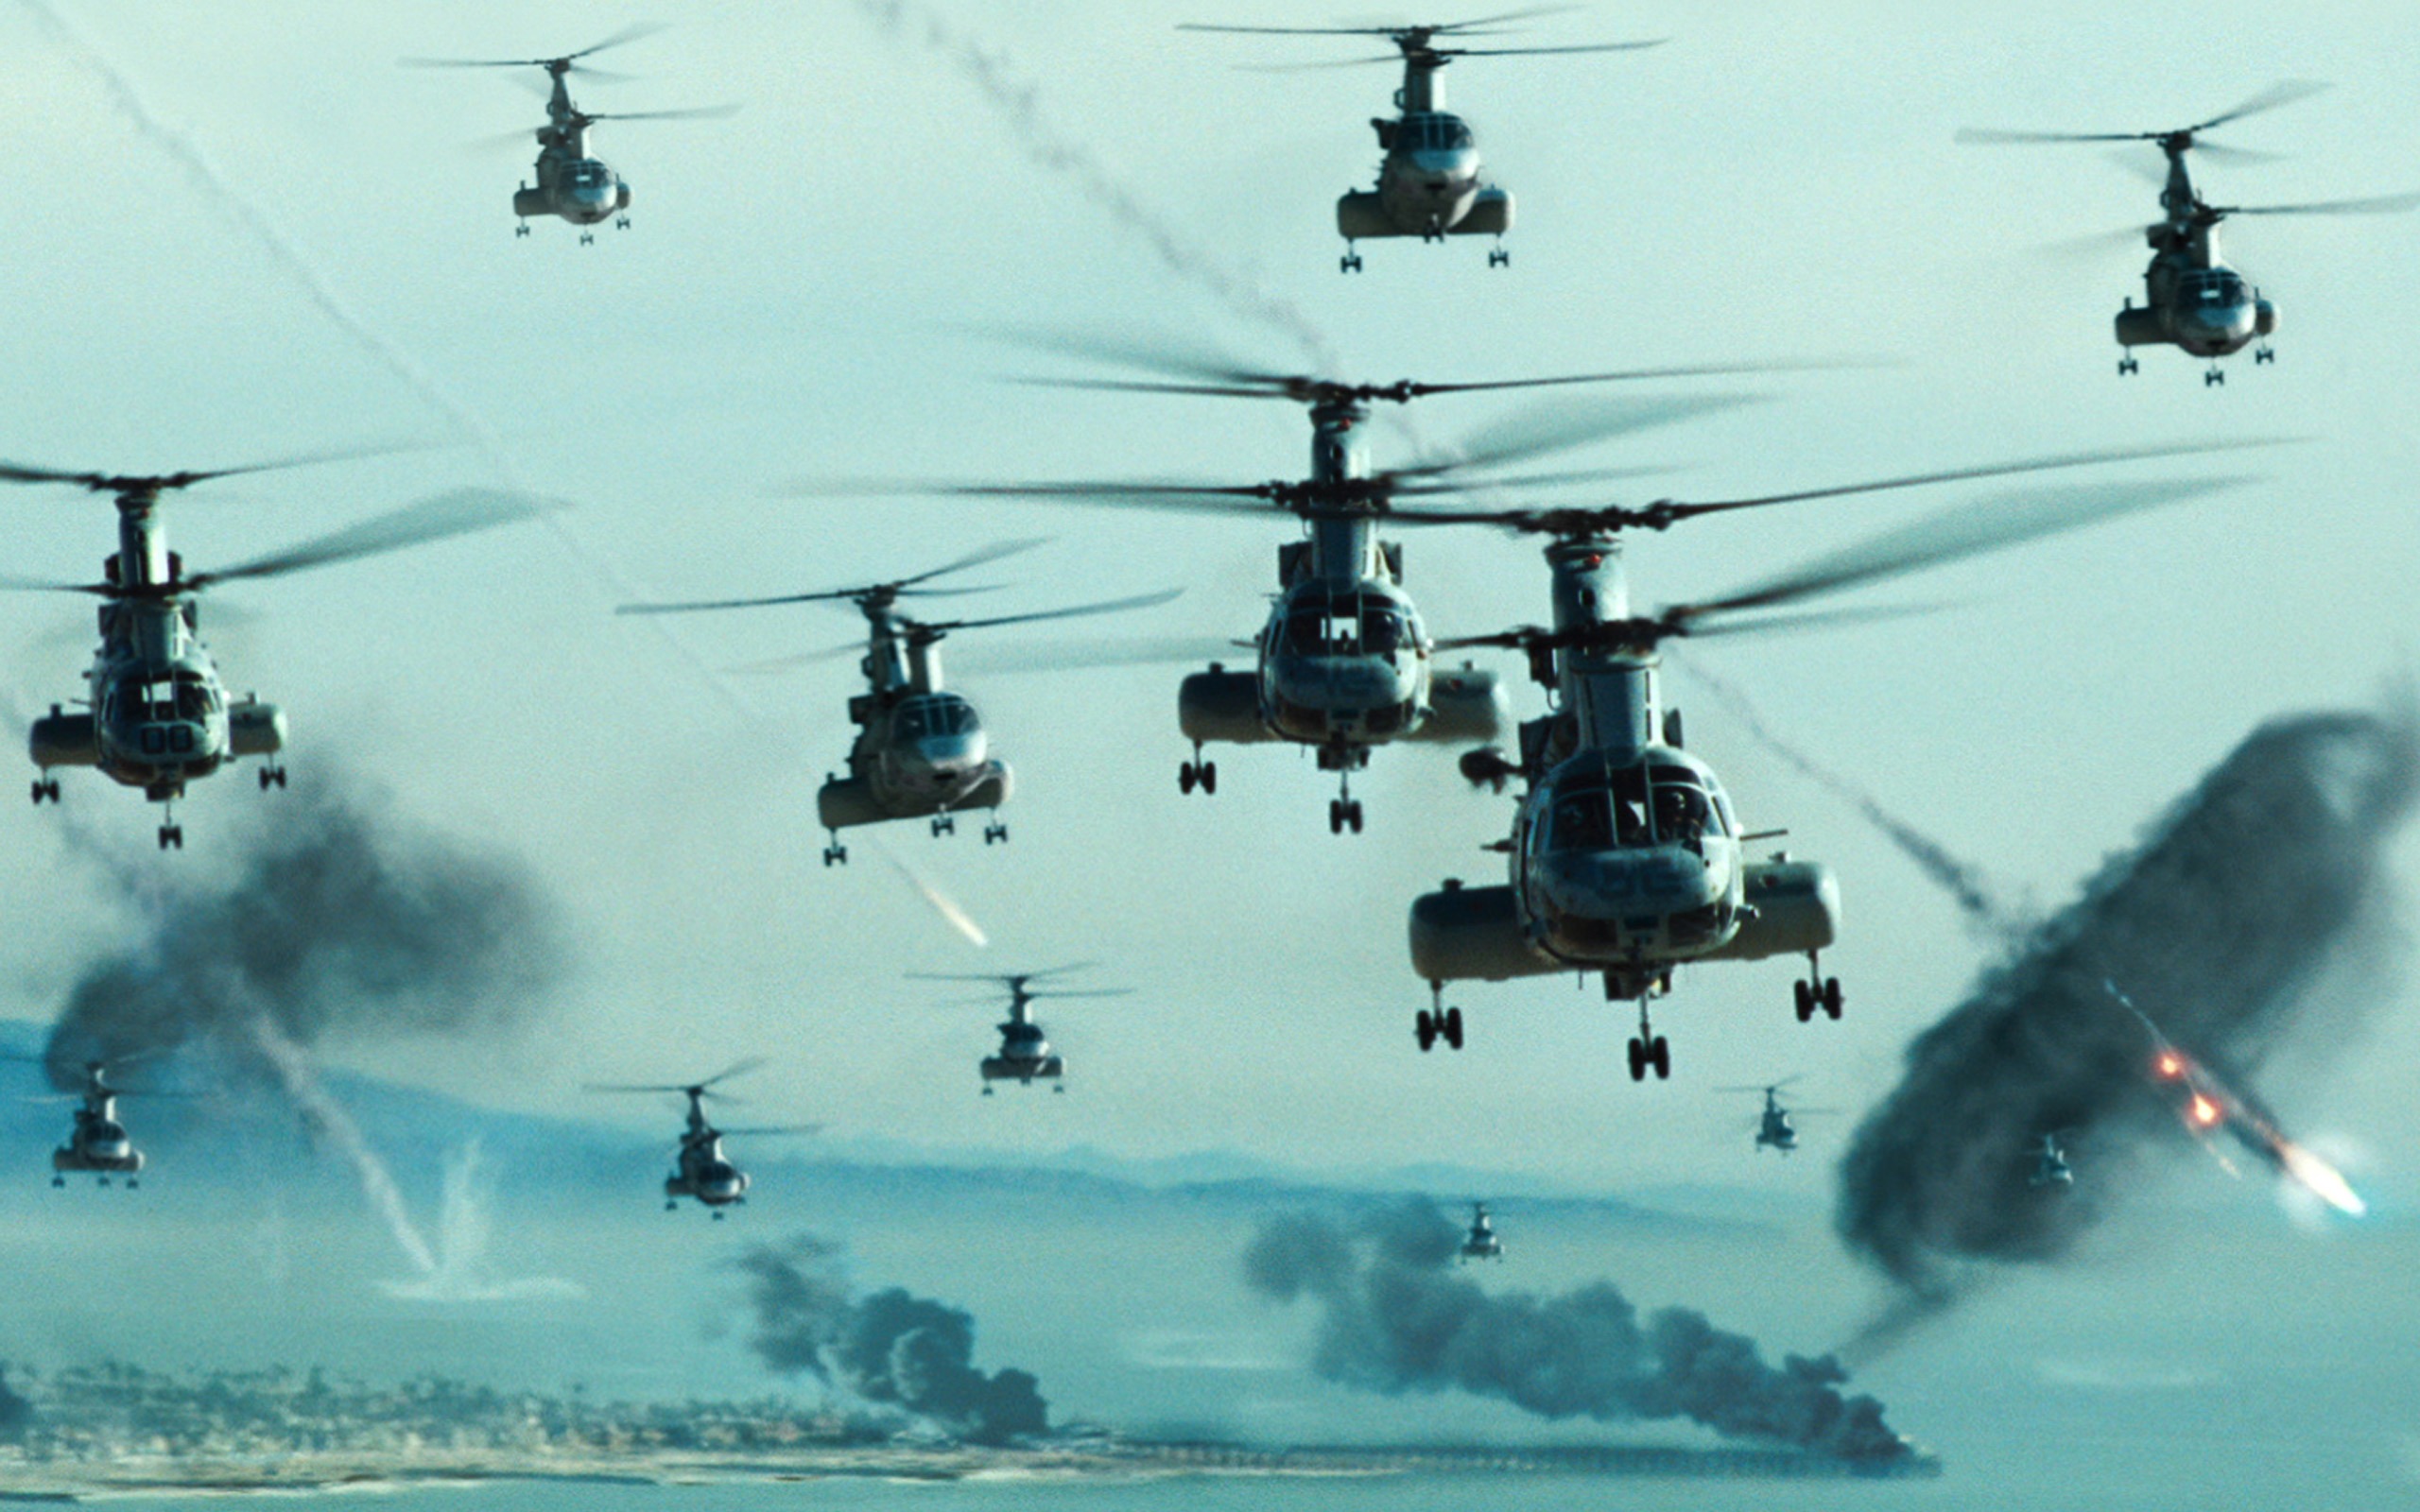 battle, Los, Angeles, Action, Sci fi, Drama, Apocalyptic, Helicopter, Battle Wallpaper